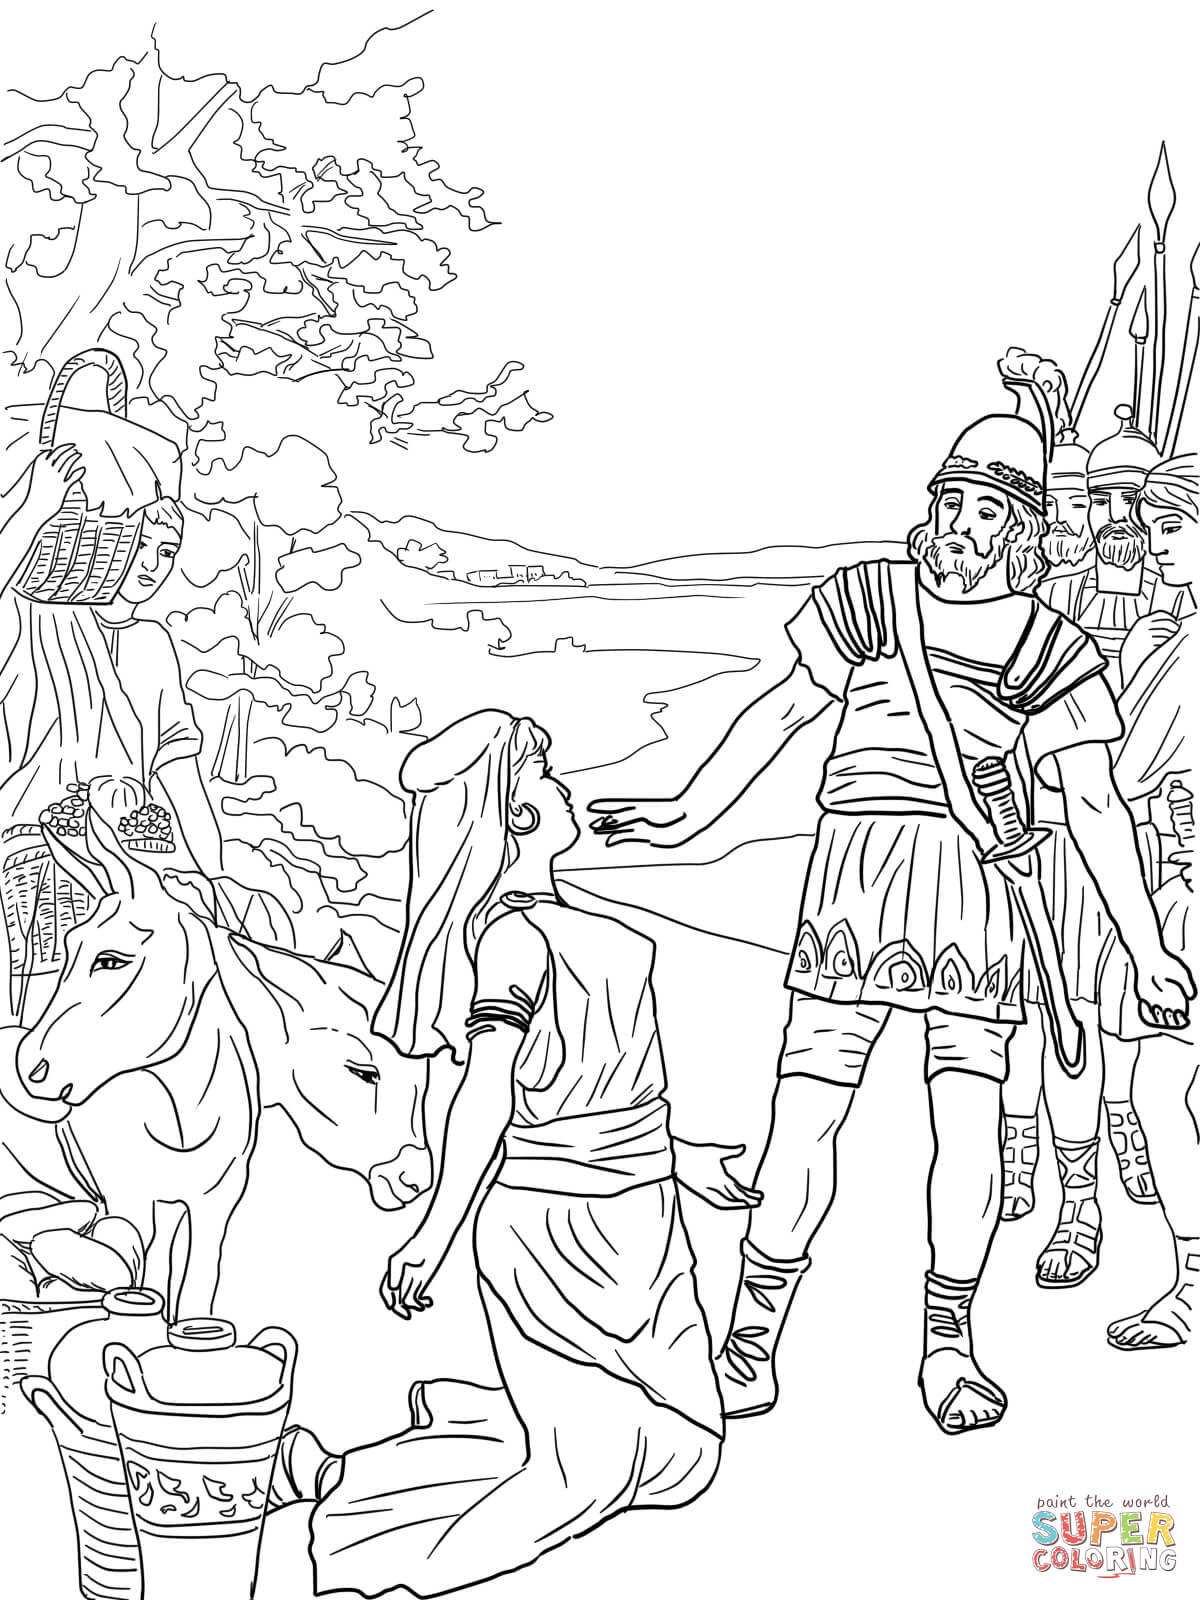 David and abigail coloring page free printable coloring pages